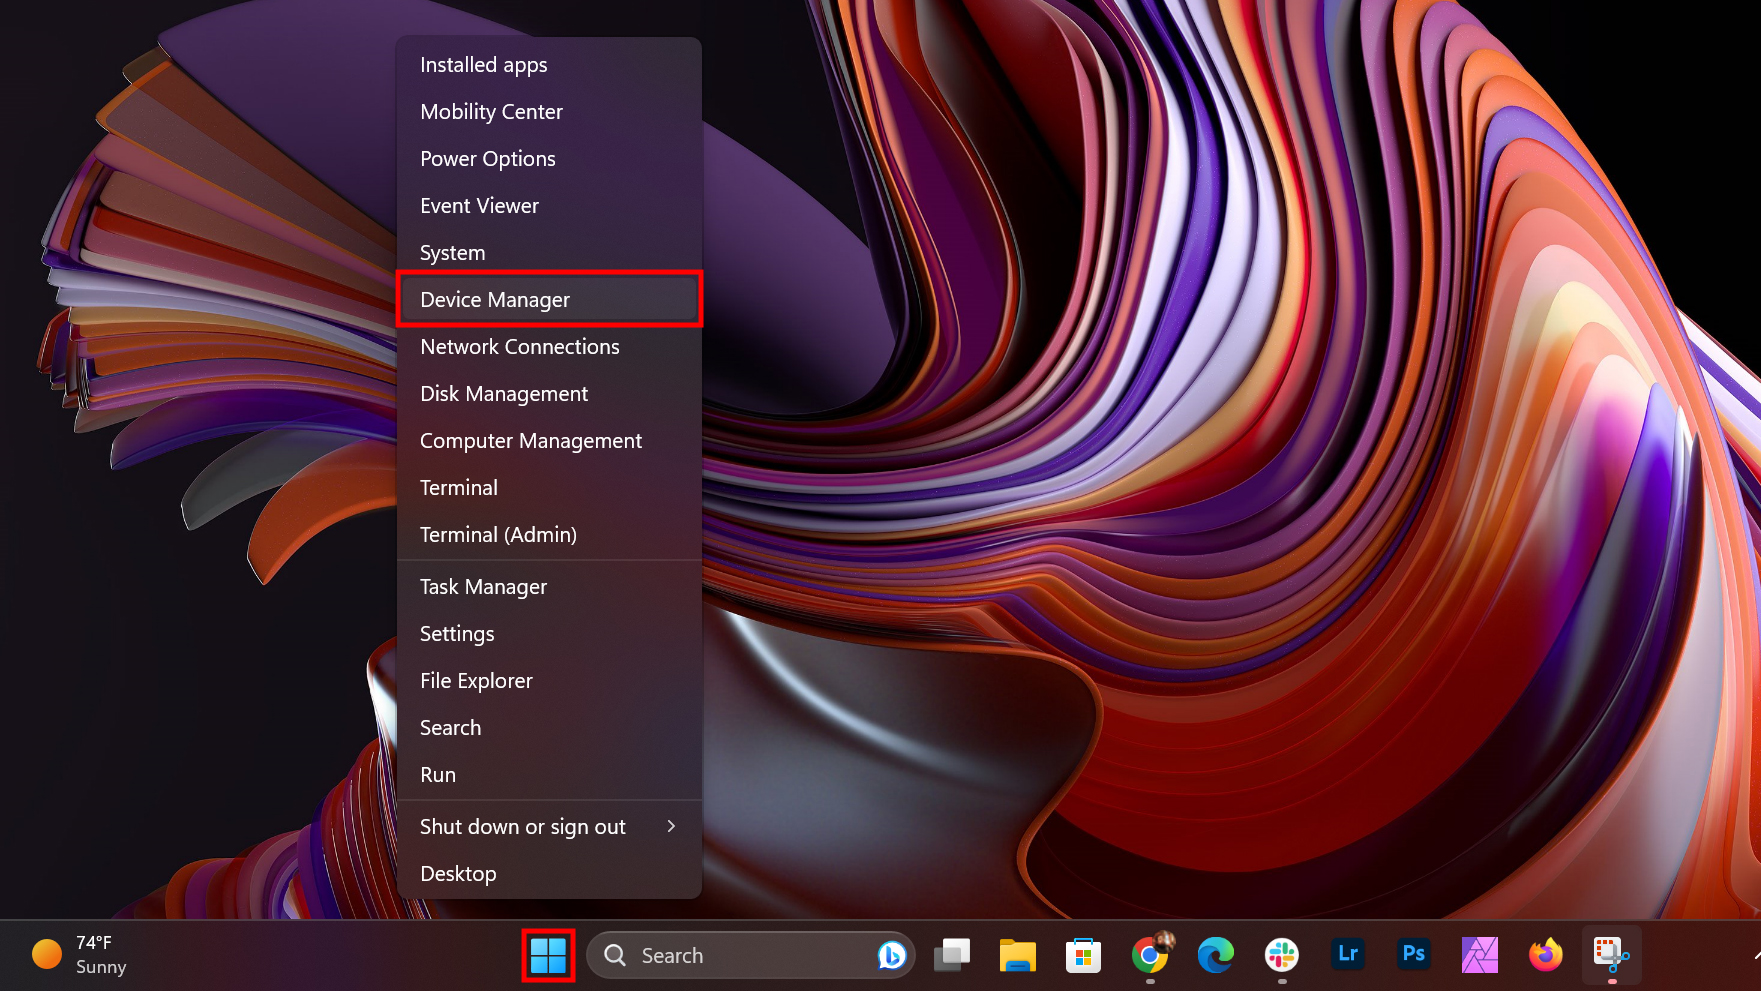 How to uninstall network card drviers on Windows 1